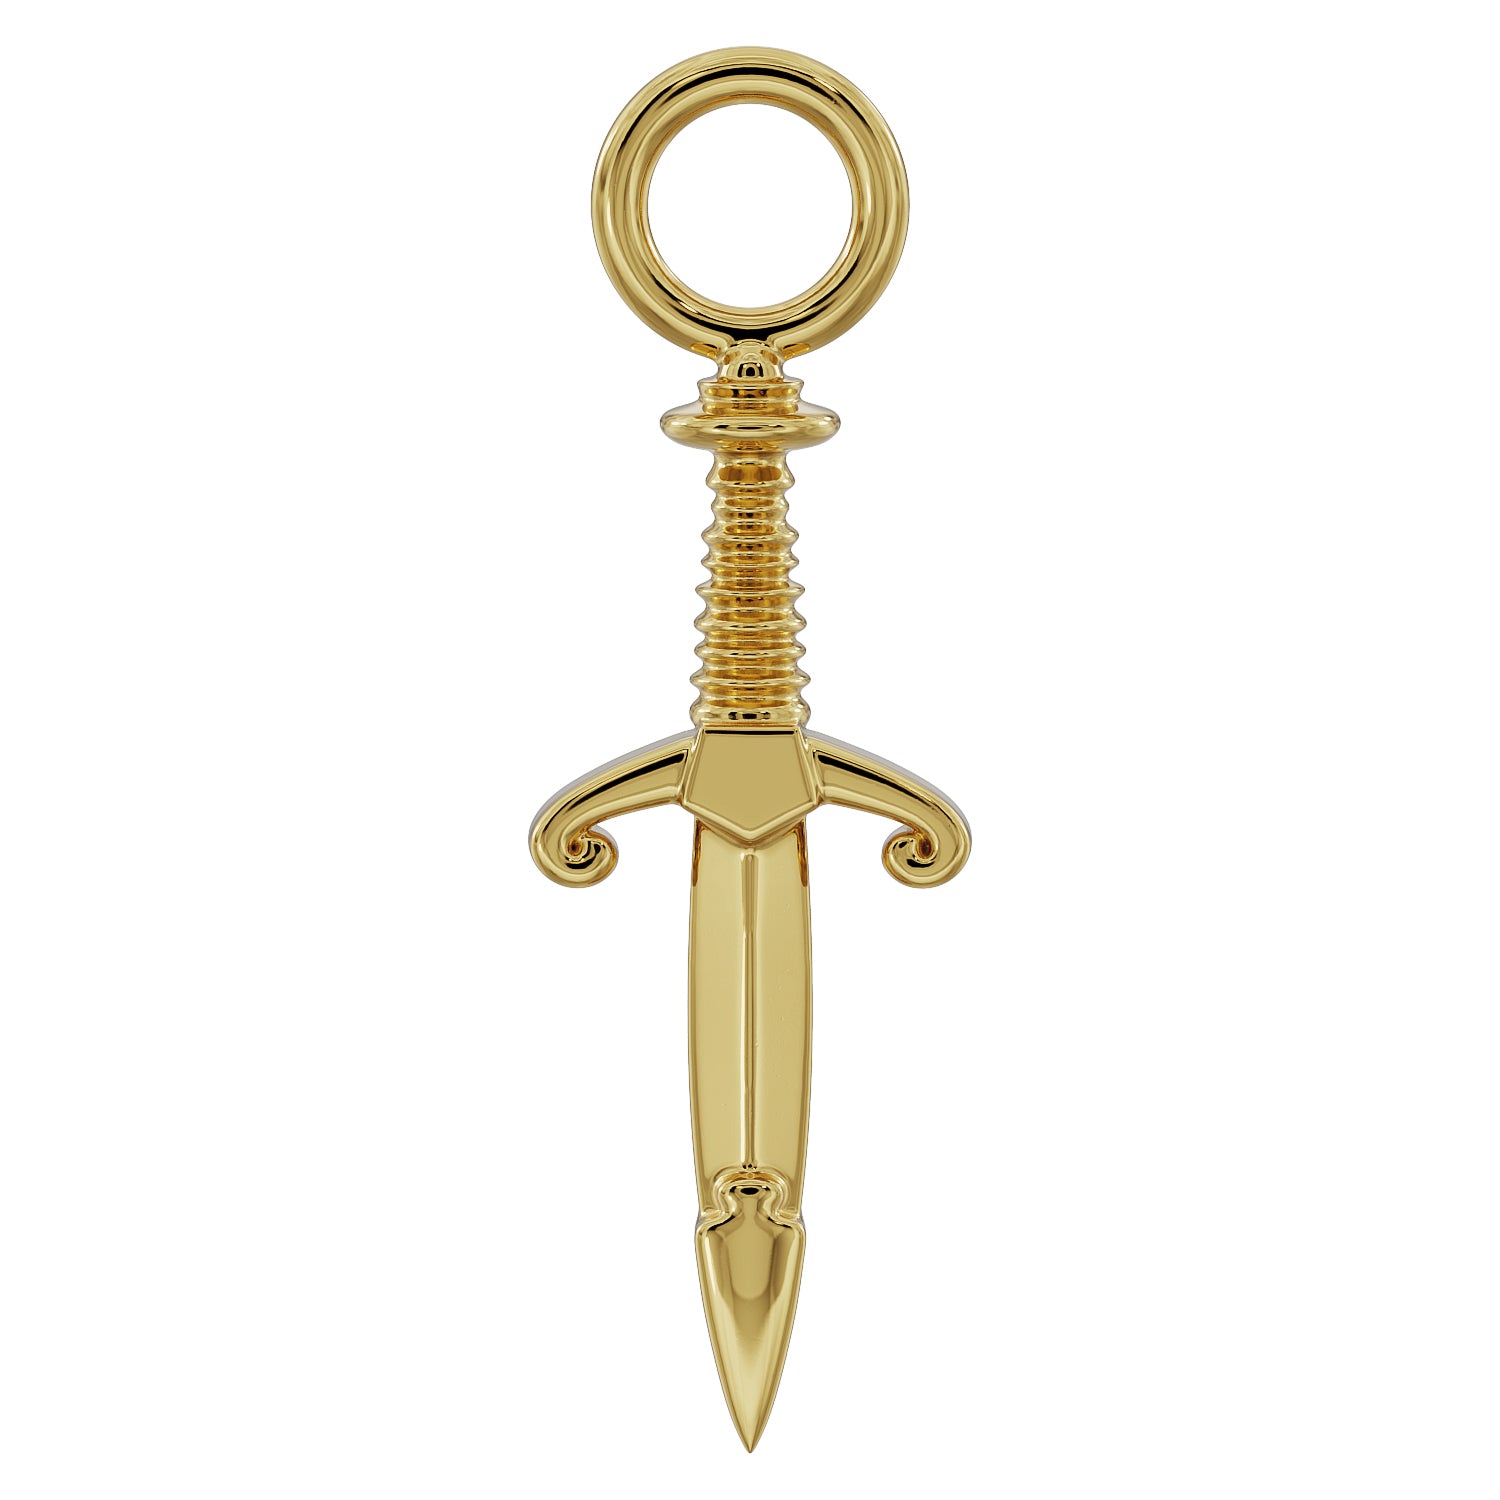 Dagger Charm Accessory for Piercing Jewelry-14K Yellow Gold